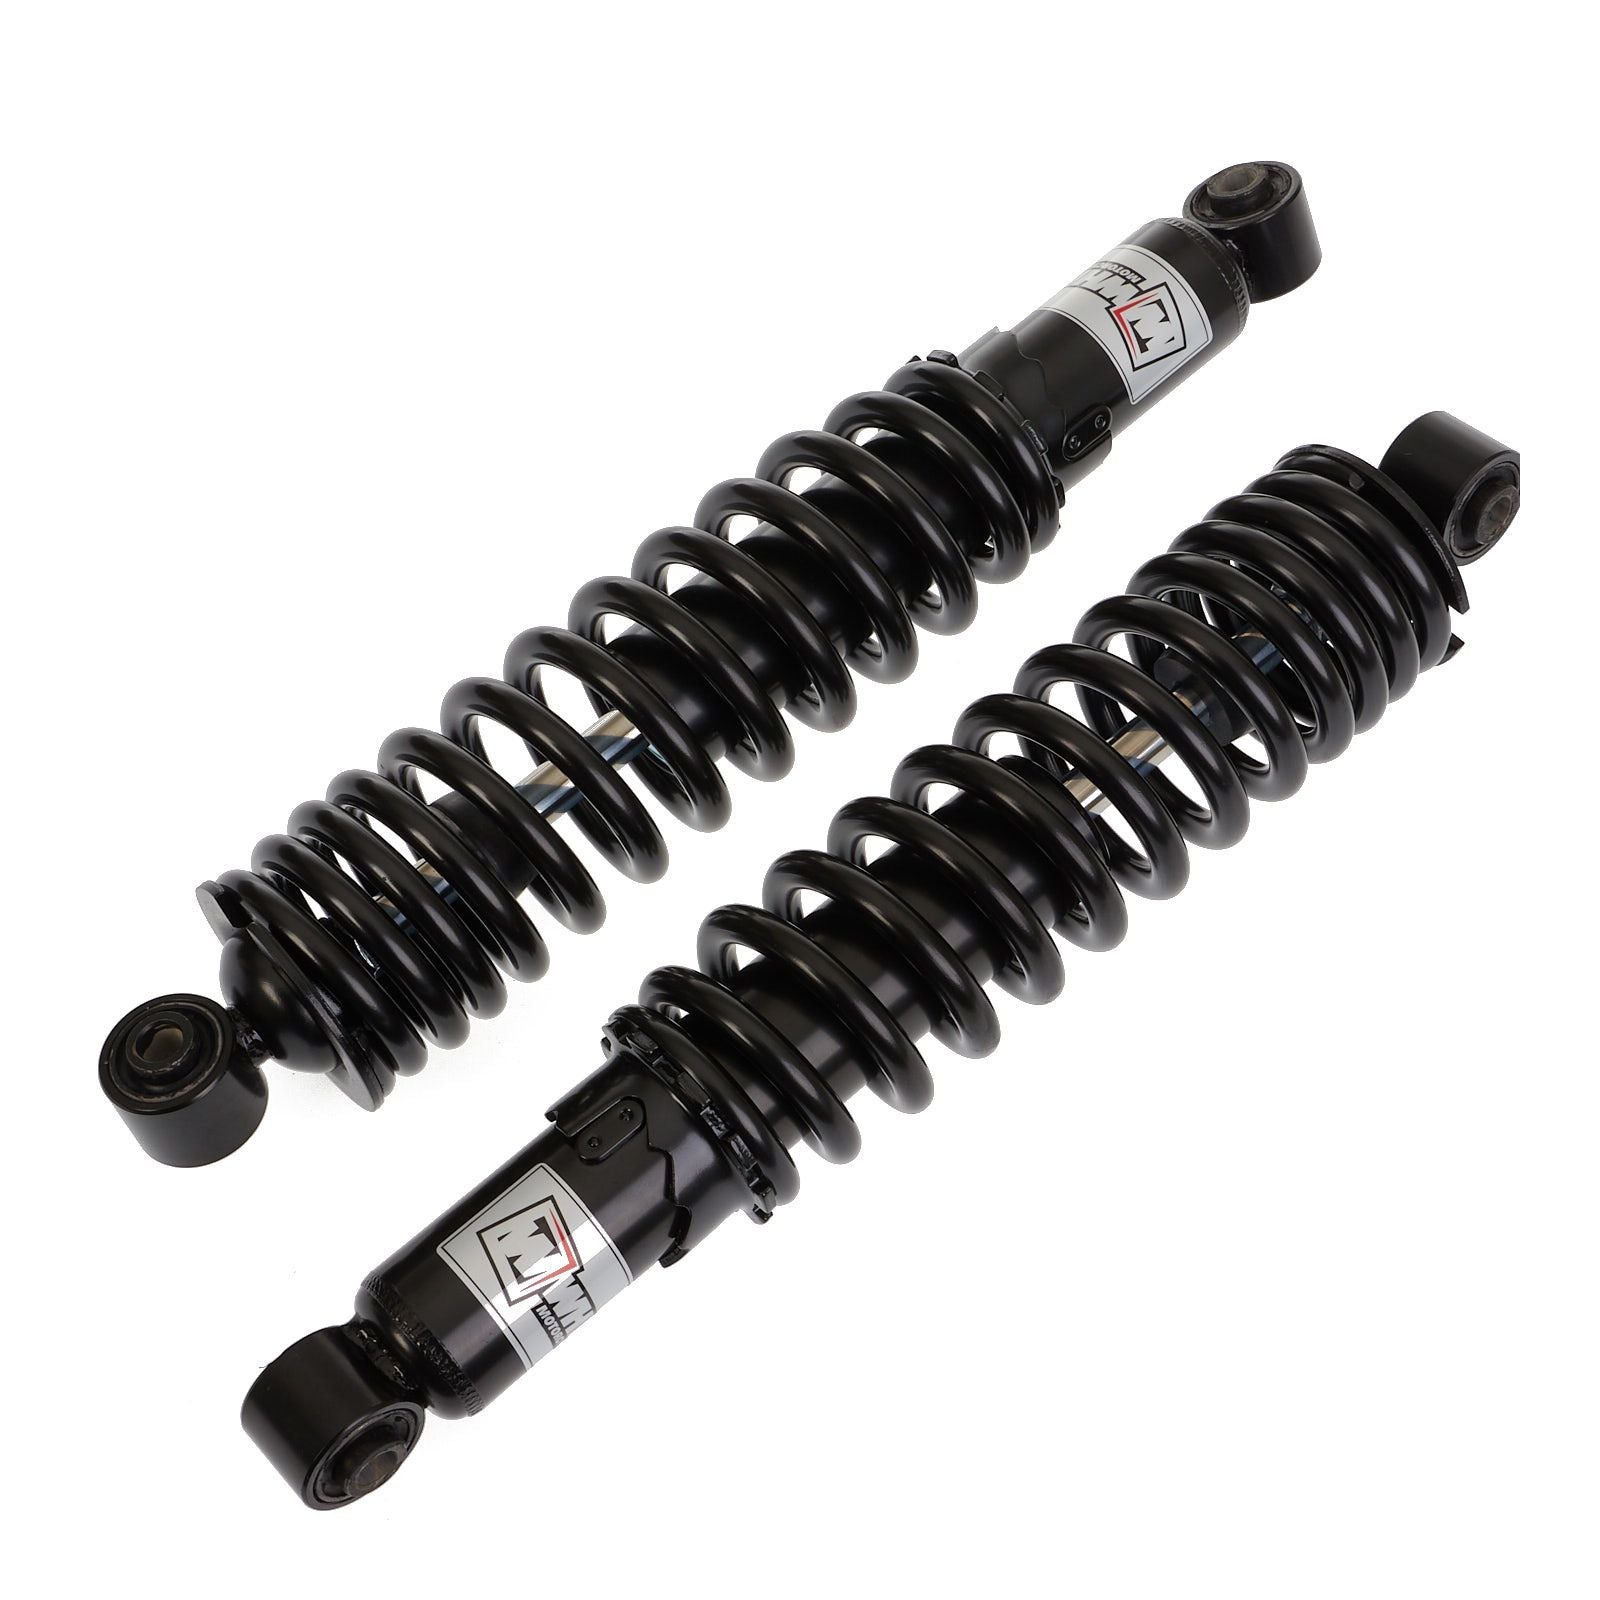 New WHITES Shock Absorbers - Front For Yamaha Grizzly 450 #WPSA009